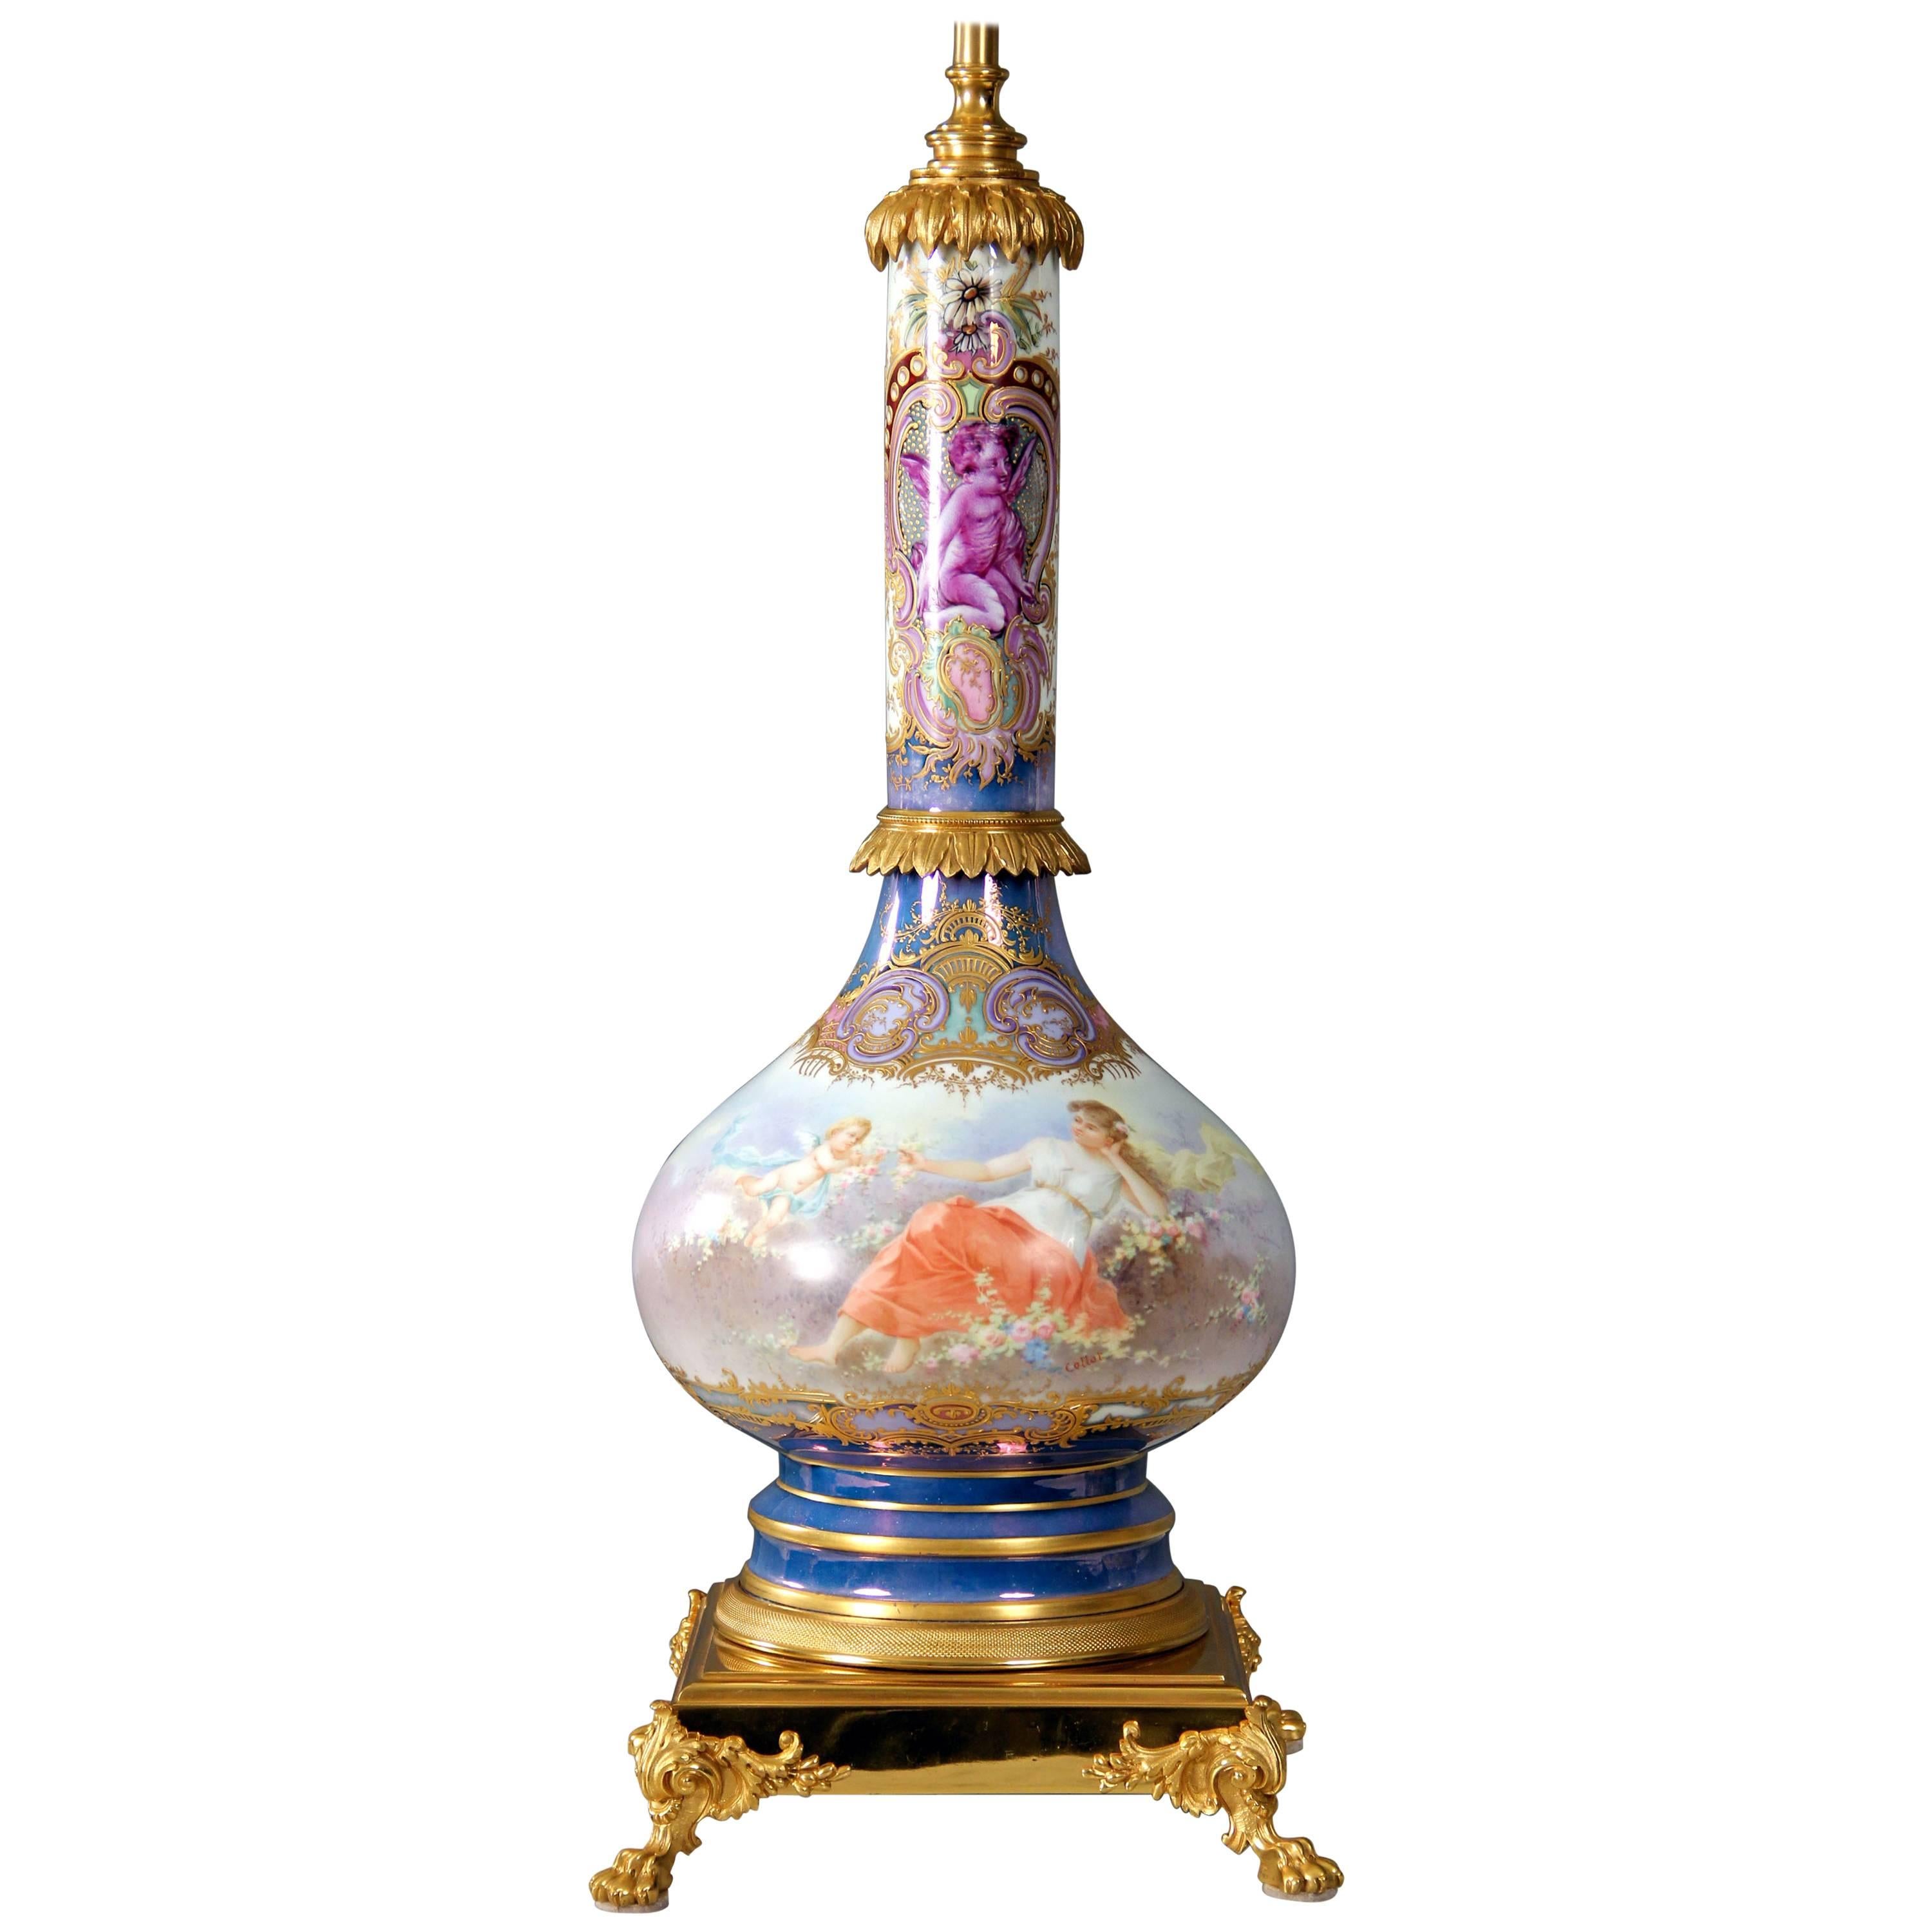 Beautiful Late 19th Century Gilt Bronze-Mounted Sèvres Style Porcelain Lamp